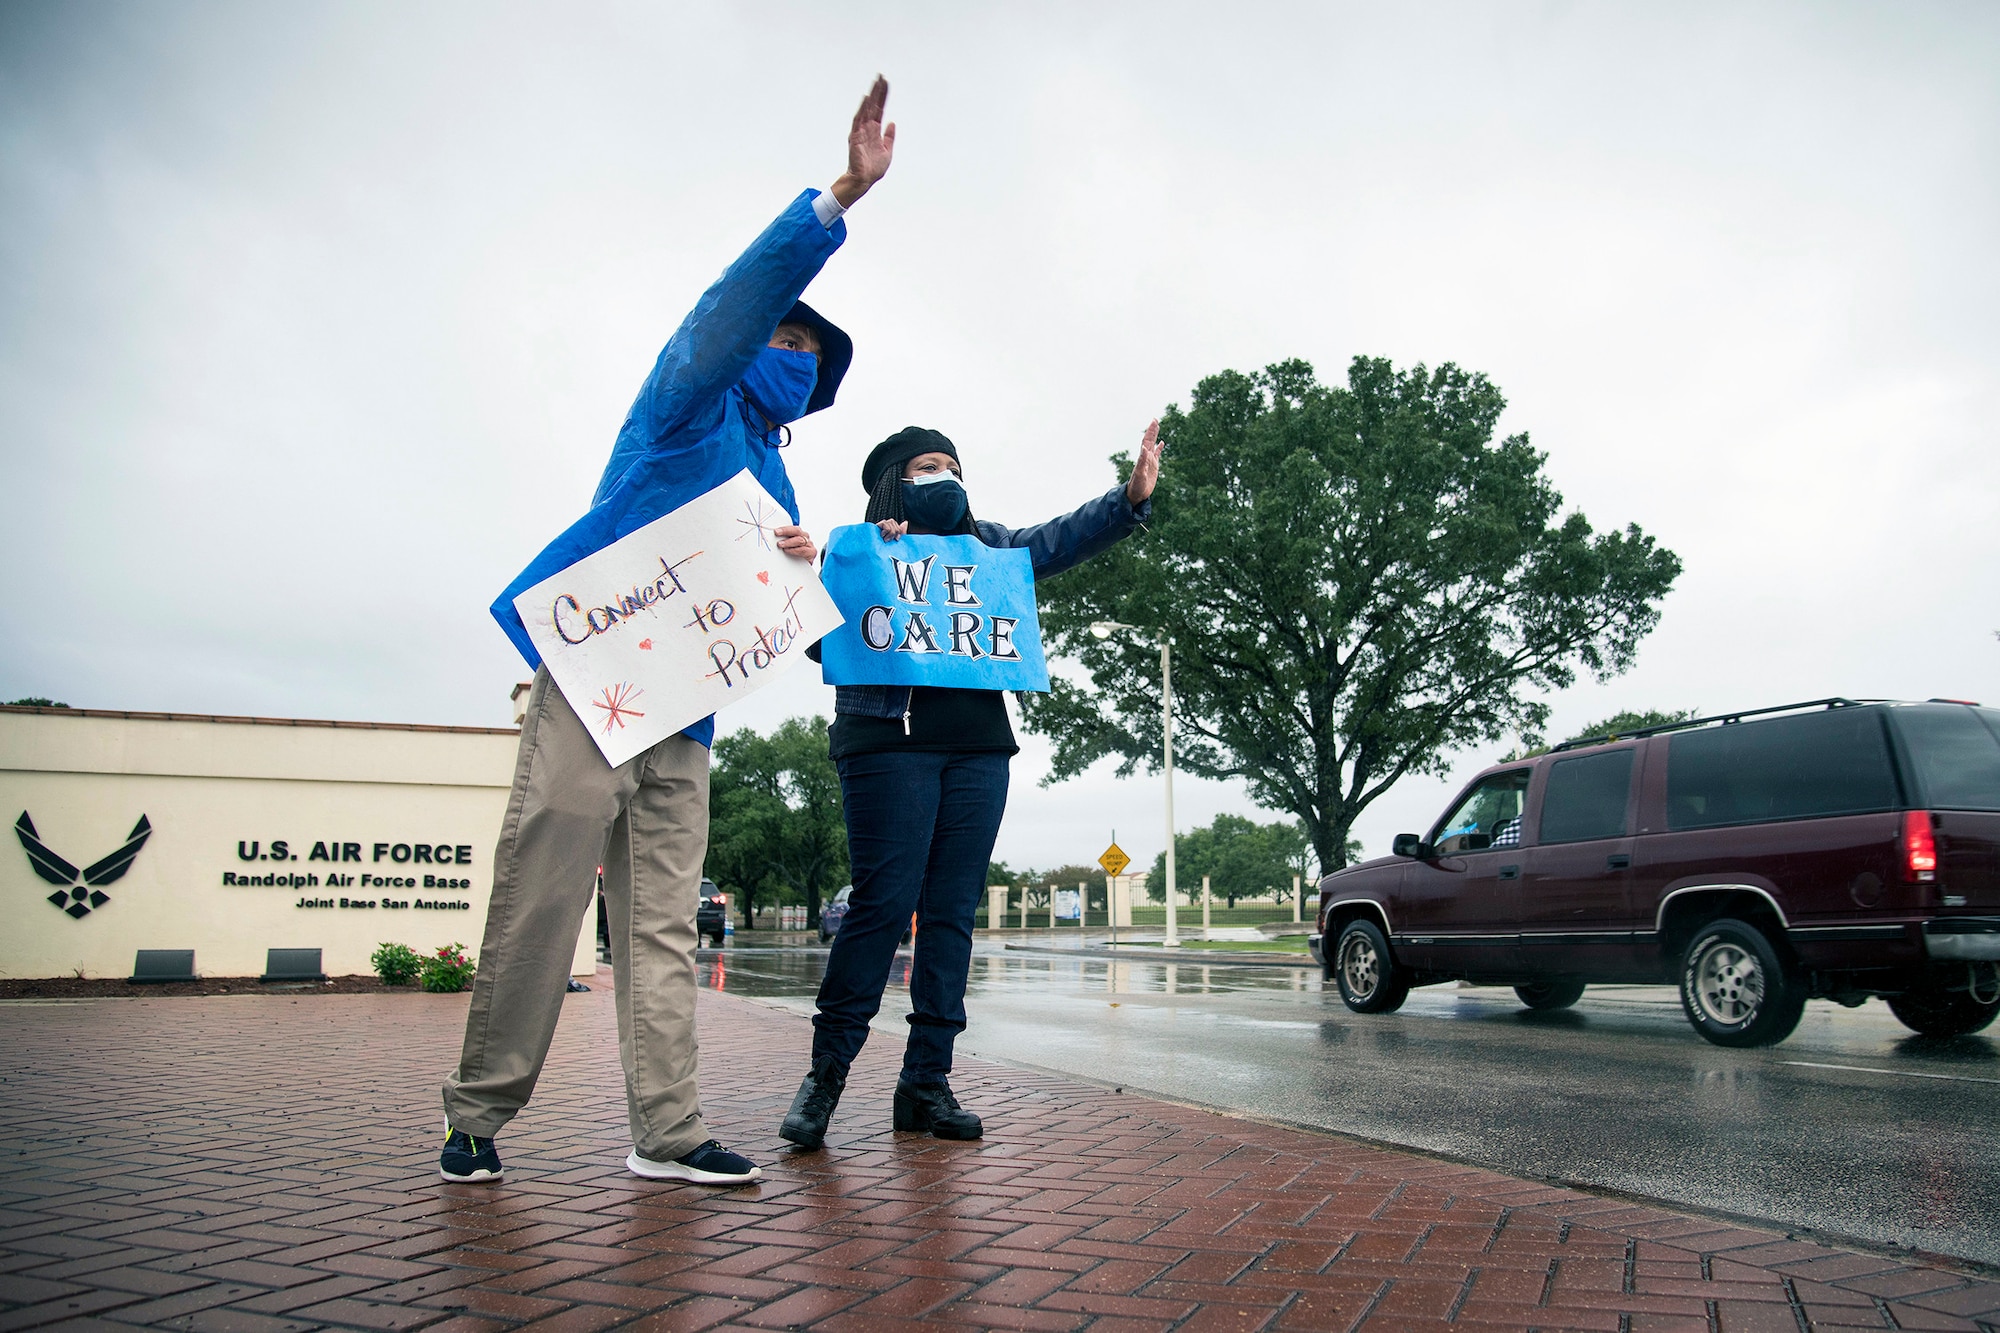 Dr. Aaron Moffett (left), 502nd Security Forces Group community support coordinator, and Dana Lockridge (right), Air Force Personnel Center, wave at people driving past them during the “We Care” event at Joint Base San Antonio-Randolph Sept. 10.